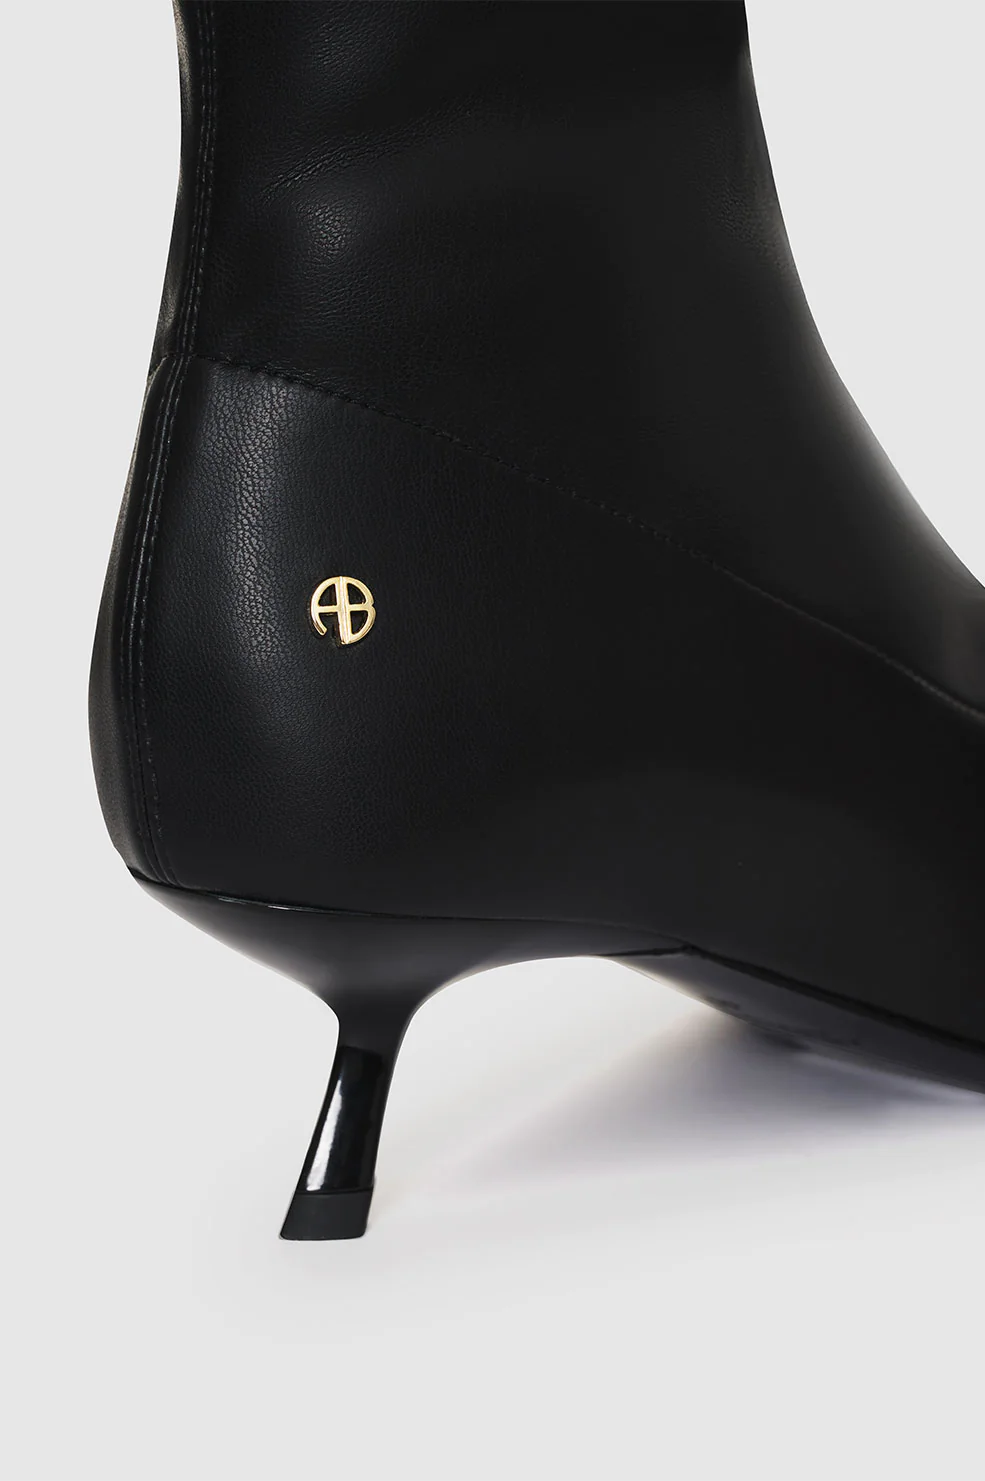 ANINE BING Hilda Boot in Black | The New Trend